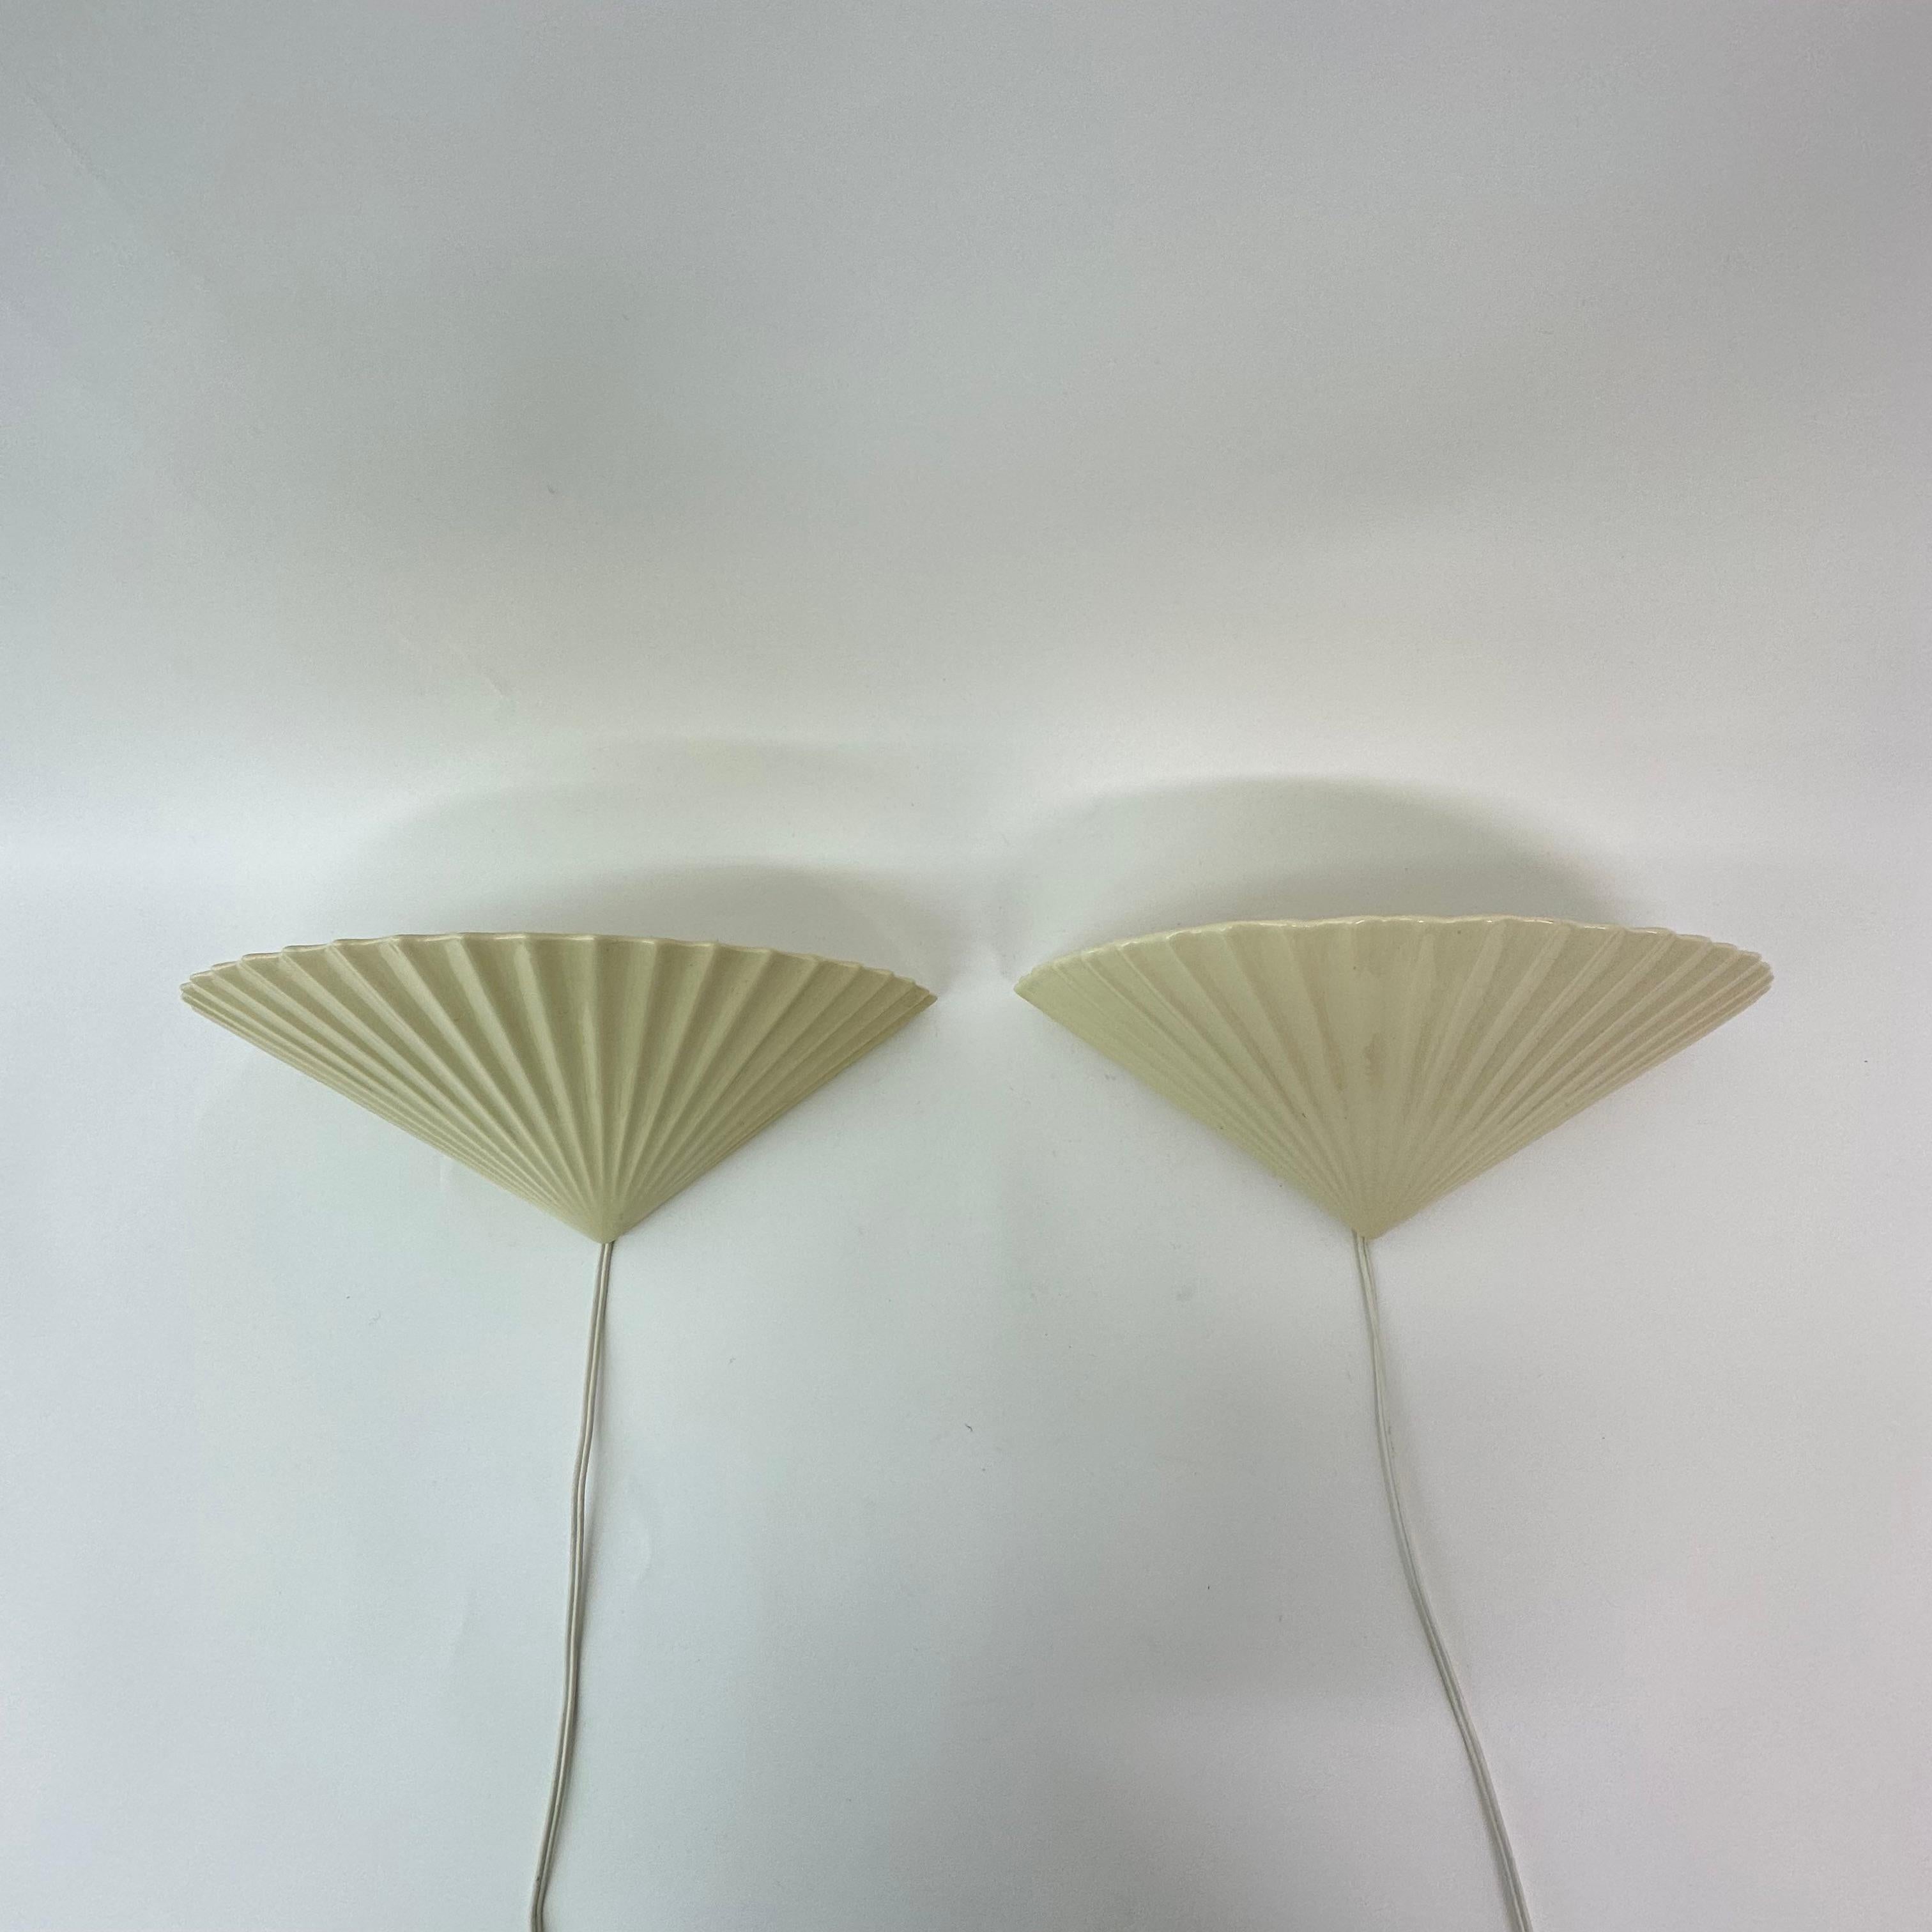 Late 20th Century Set of 2 Ceramic Wall Lamps, 1970s